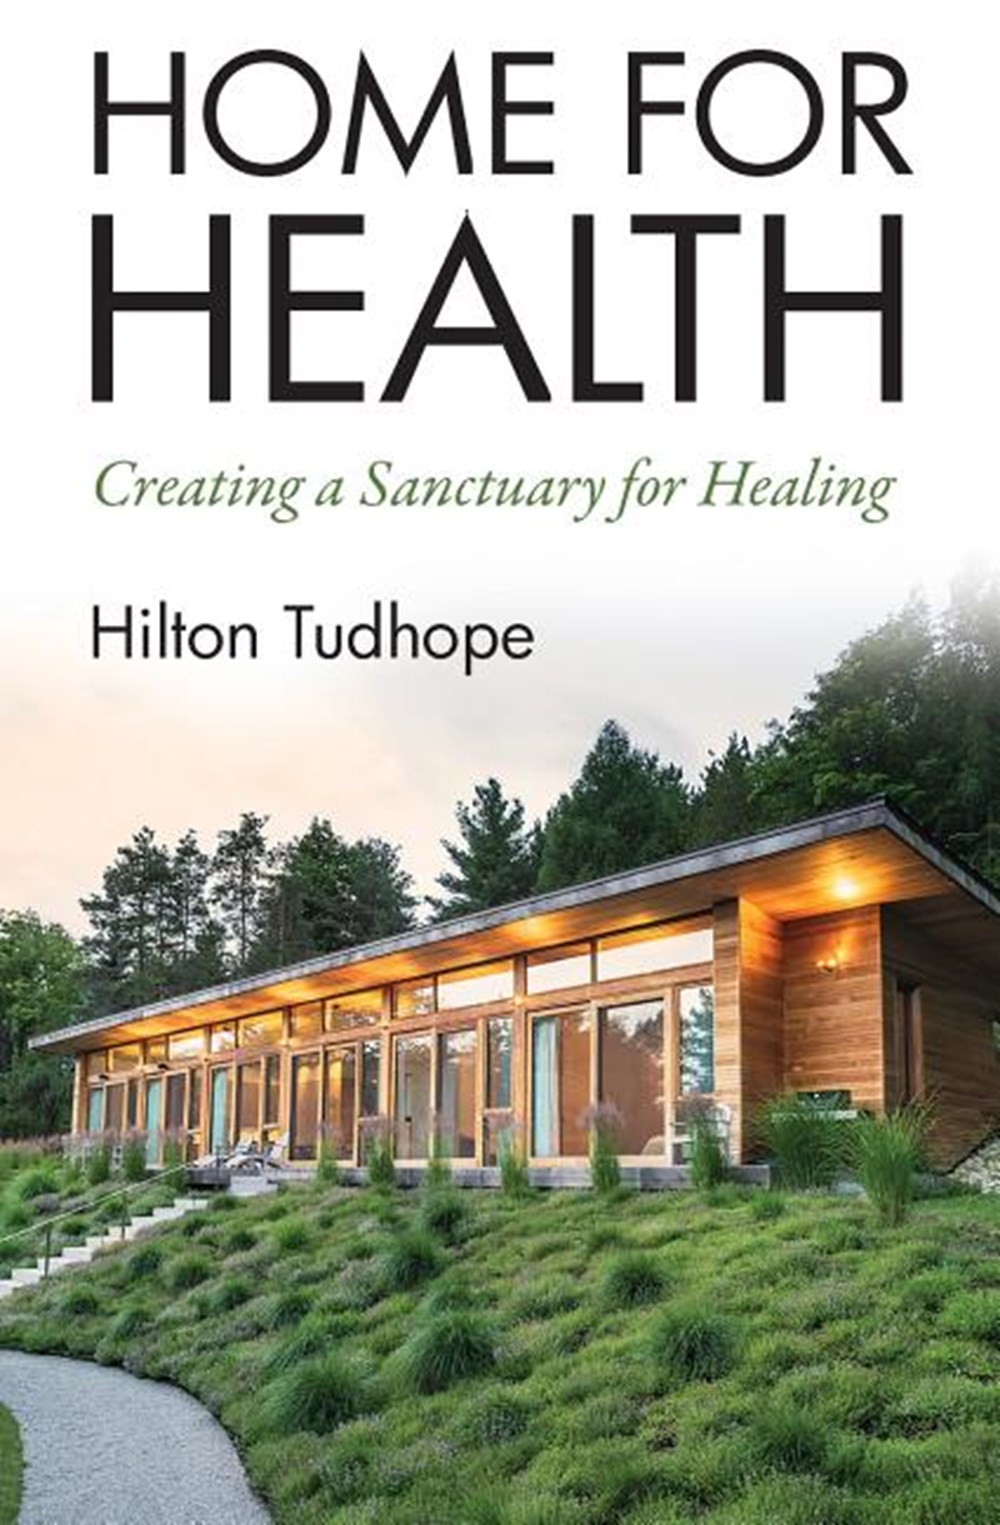 Home for Health: Creating a Sanctuary for Healing